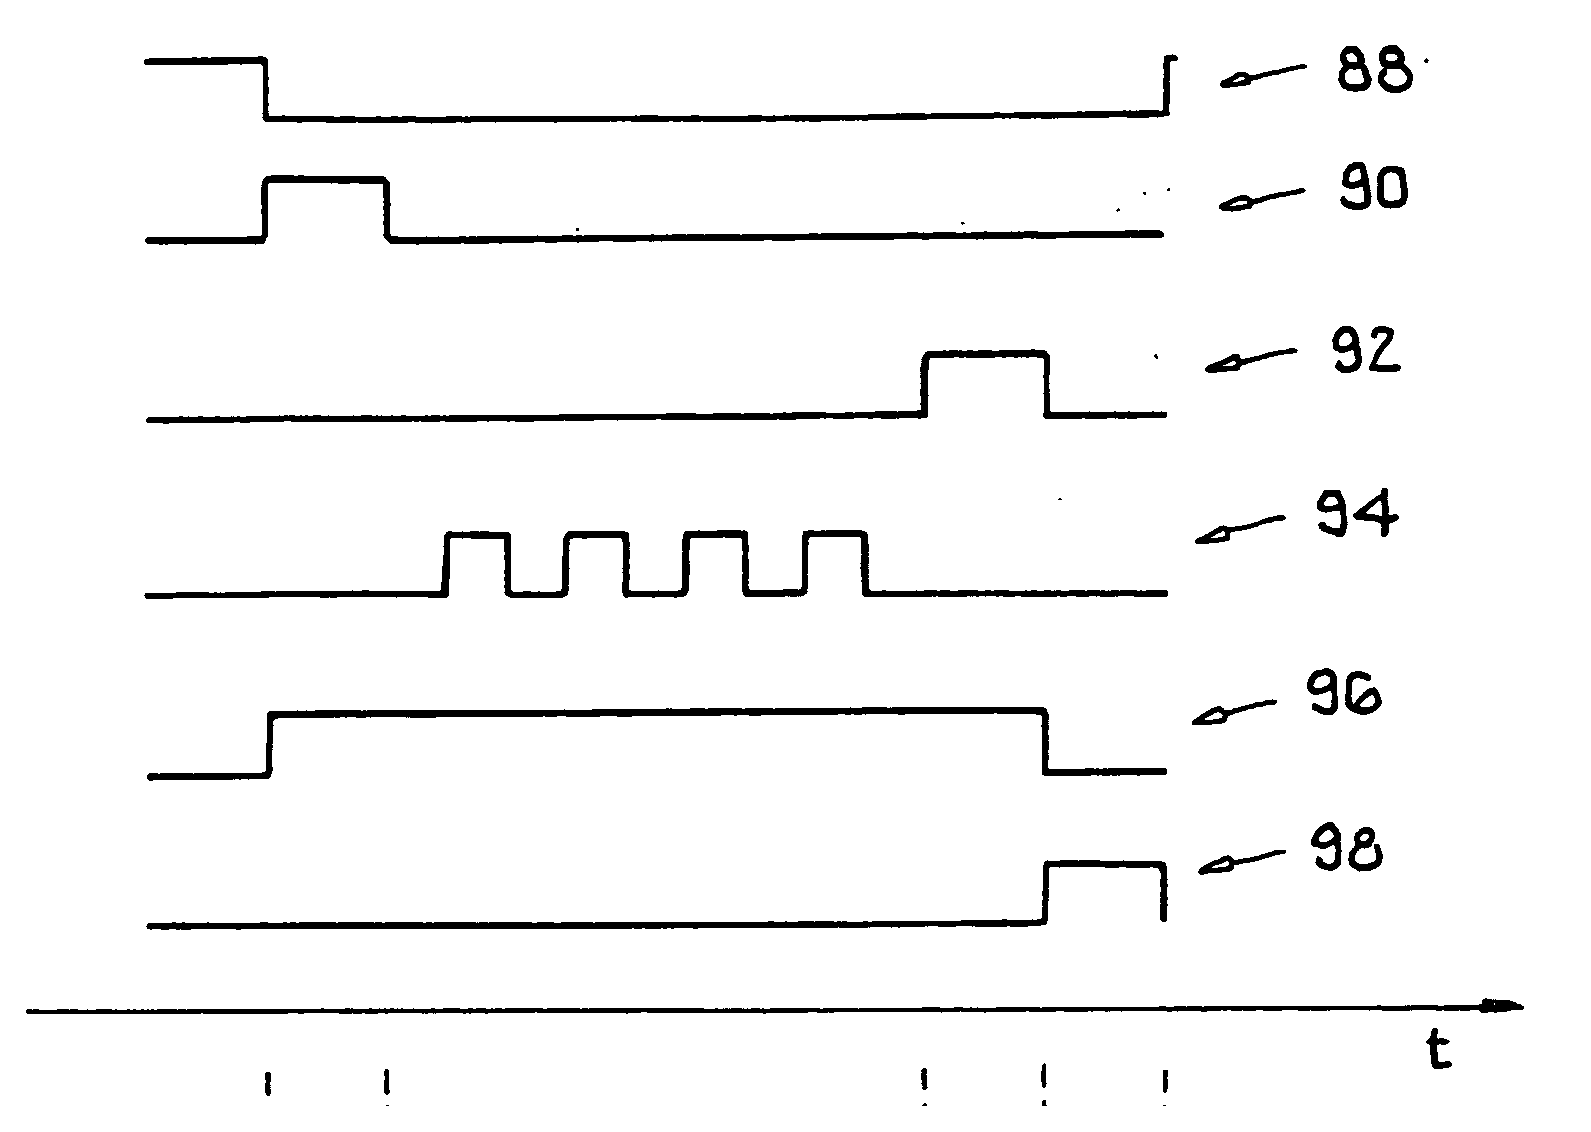 Driver circuit, in particular for laser diodes, and method for providing a drive pulse sequence